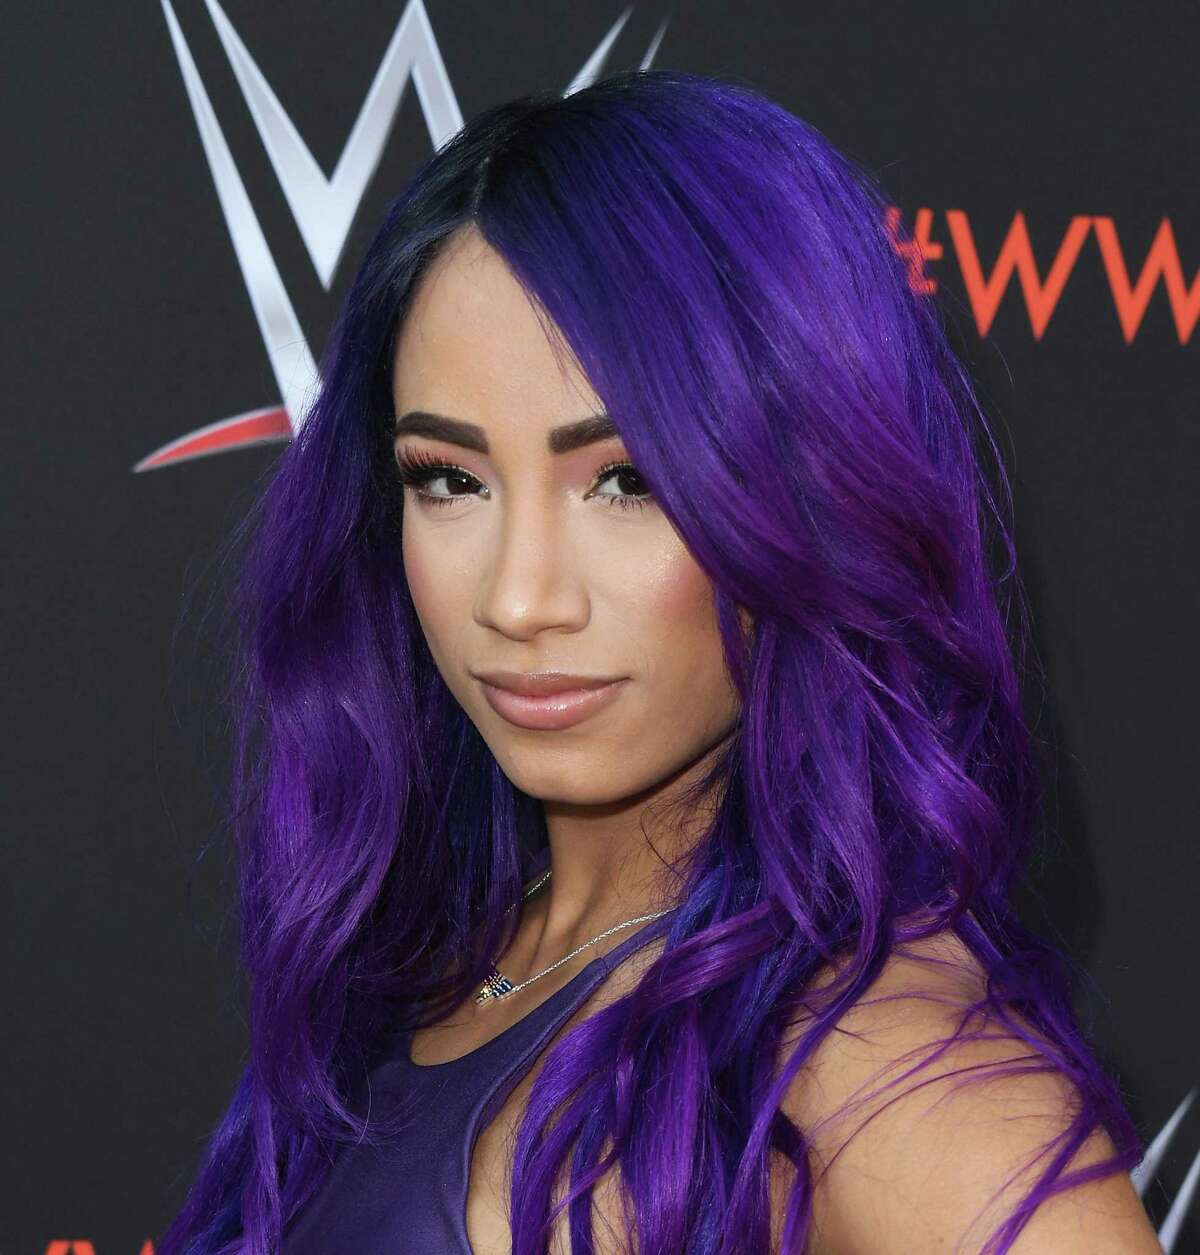 WWE star Sasha Banks is one of the biggest names in professional wrestling, and in 2016 was one of the first women to headline a WWE pay-per-view event.